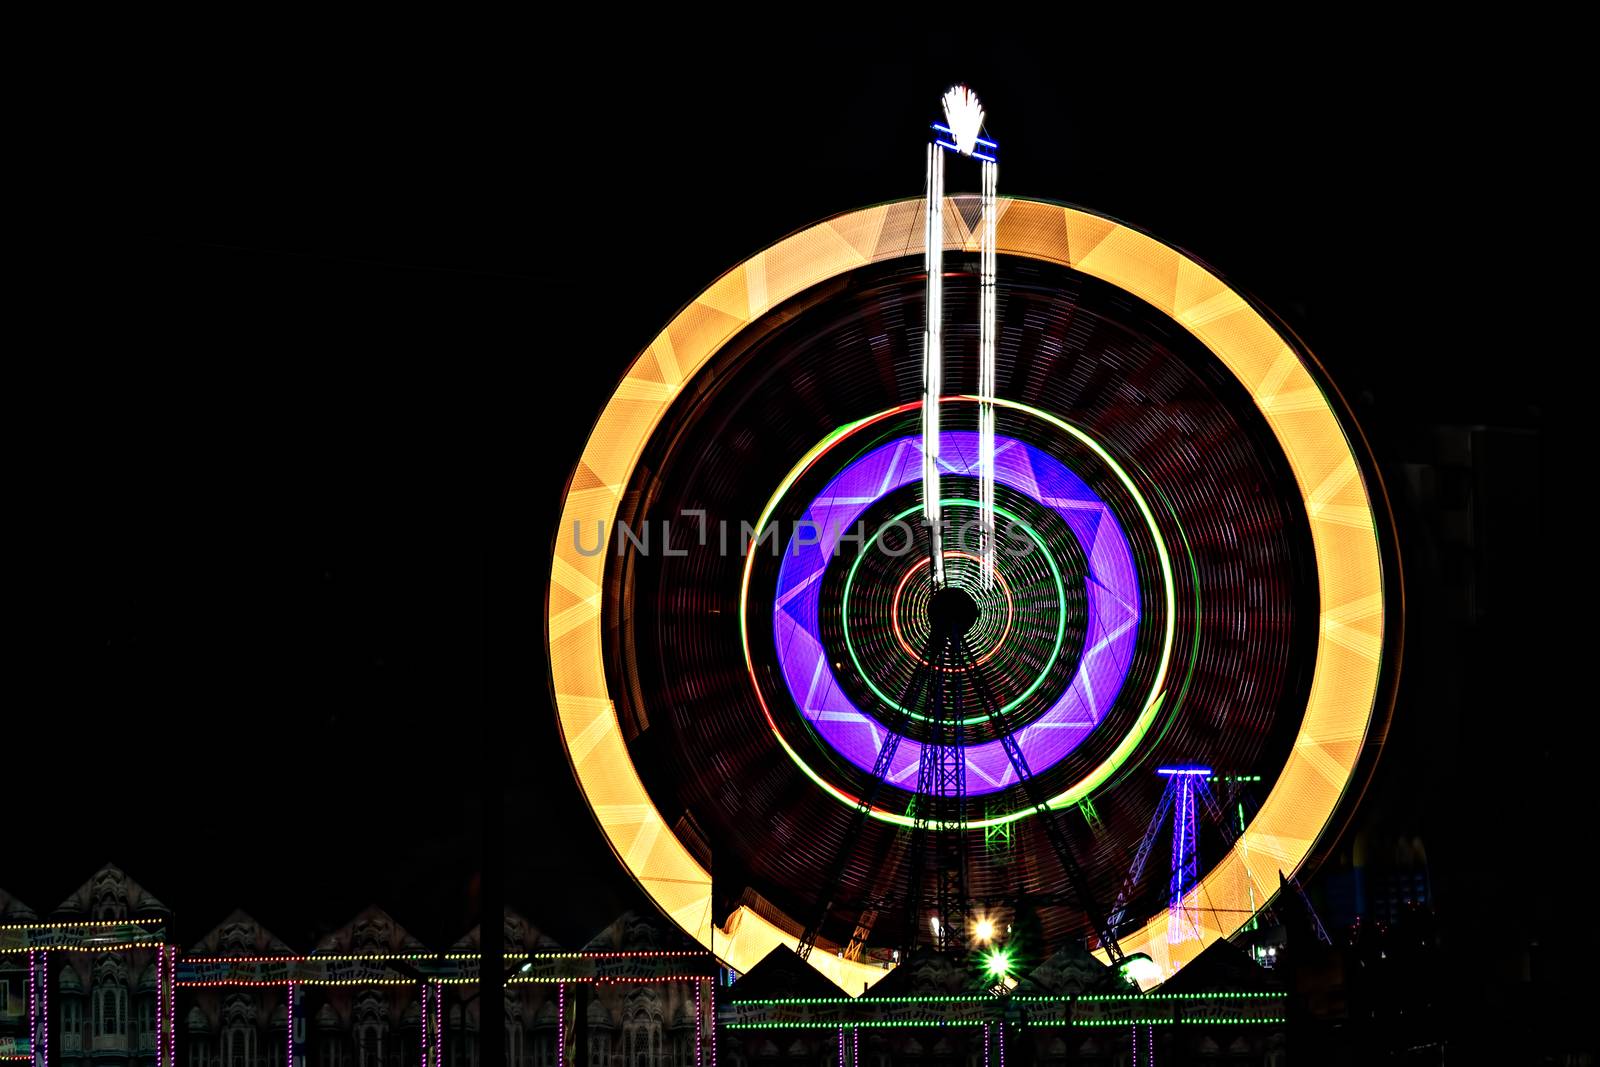 Fun fair Giant Ferris wheel spinning at night. Slow shutter photograph of a rotating giant wheel at night. by lalam